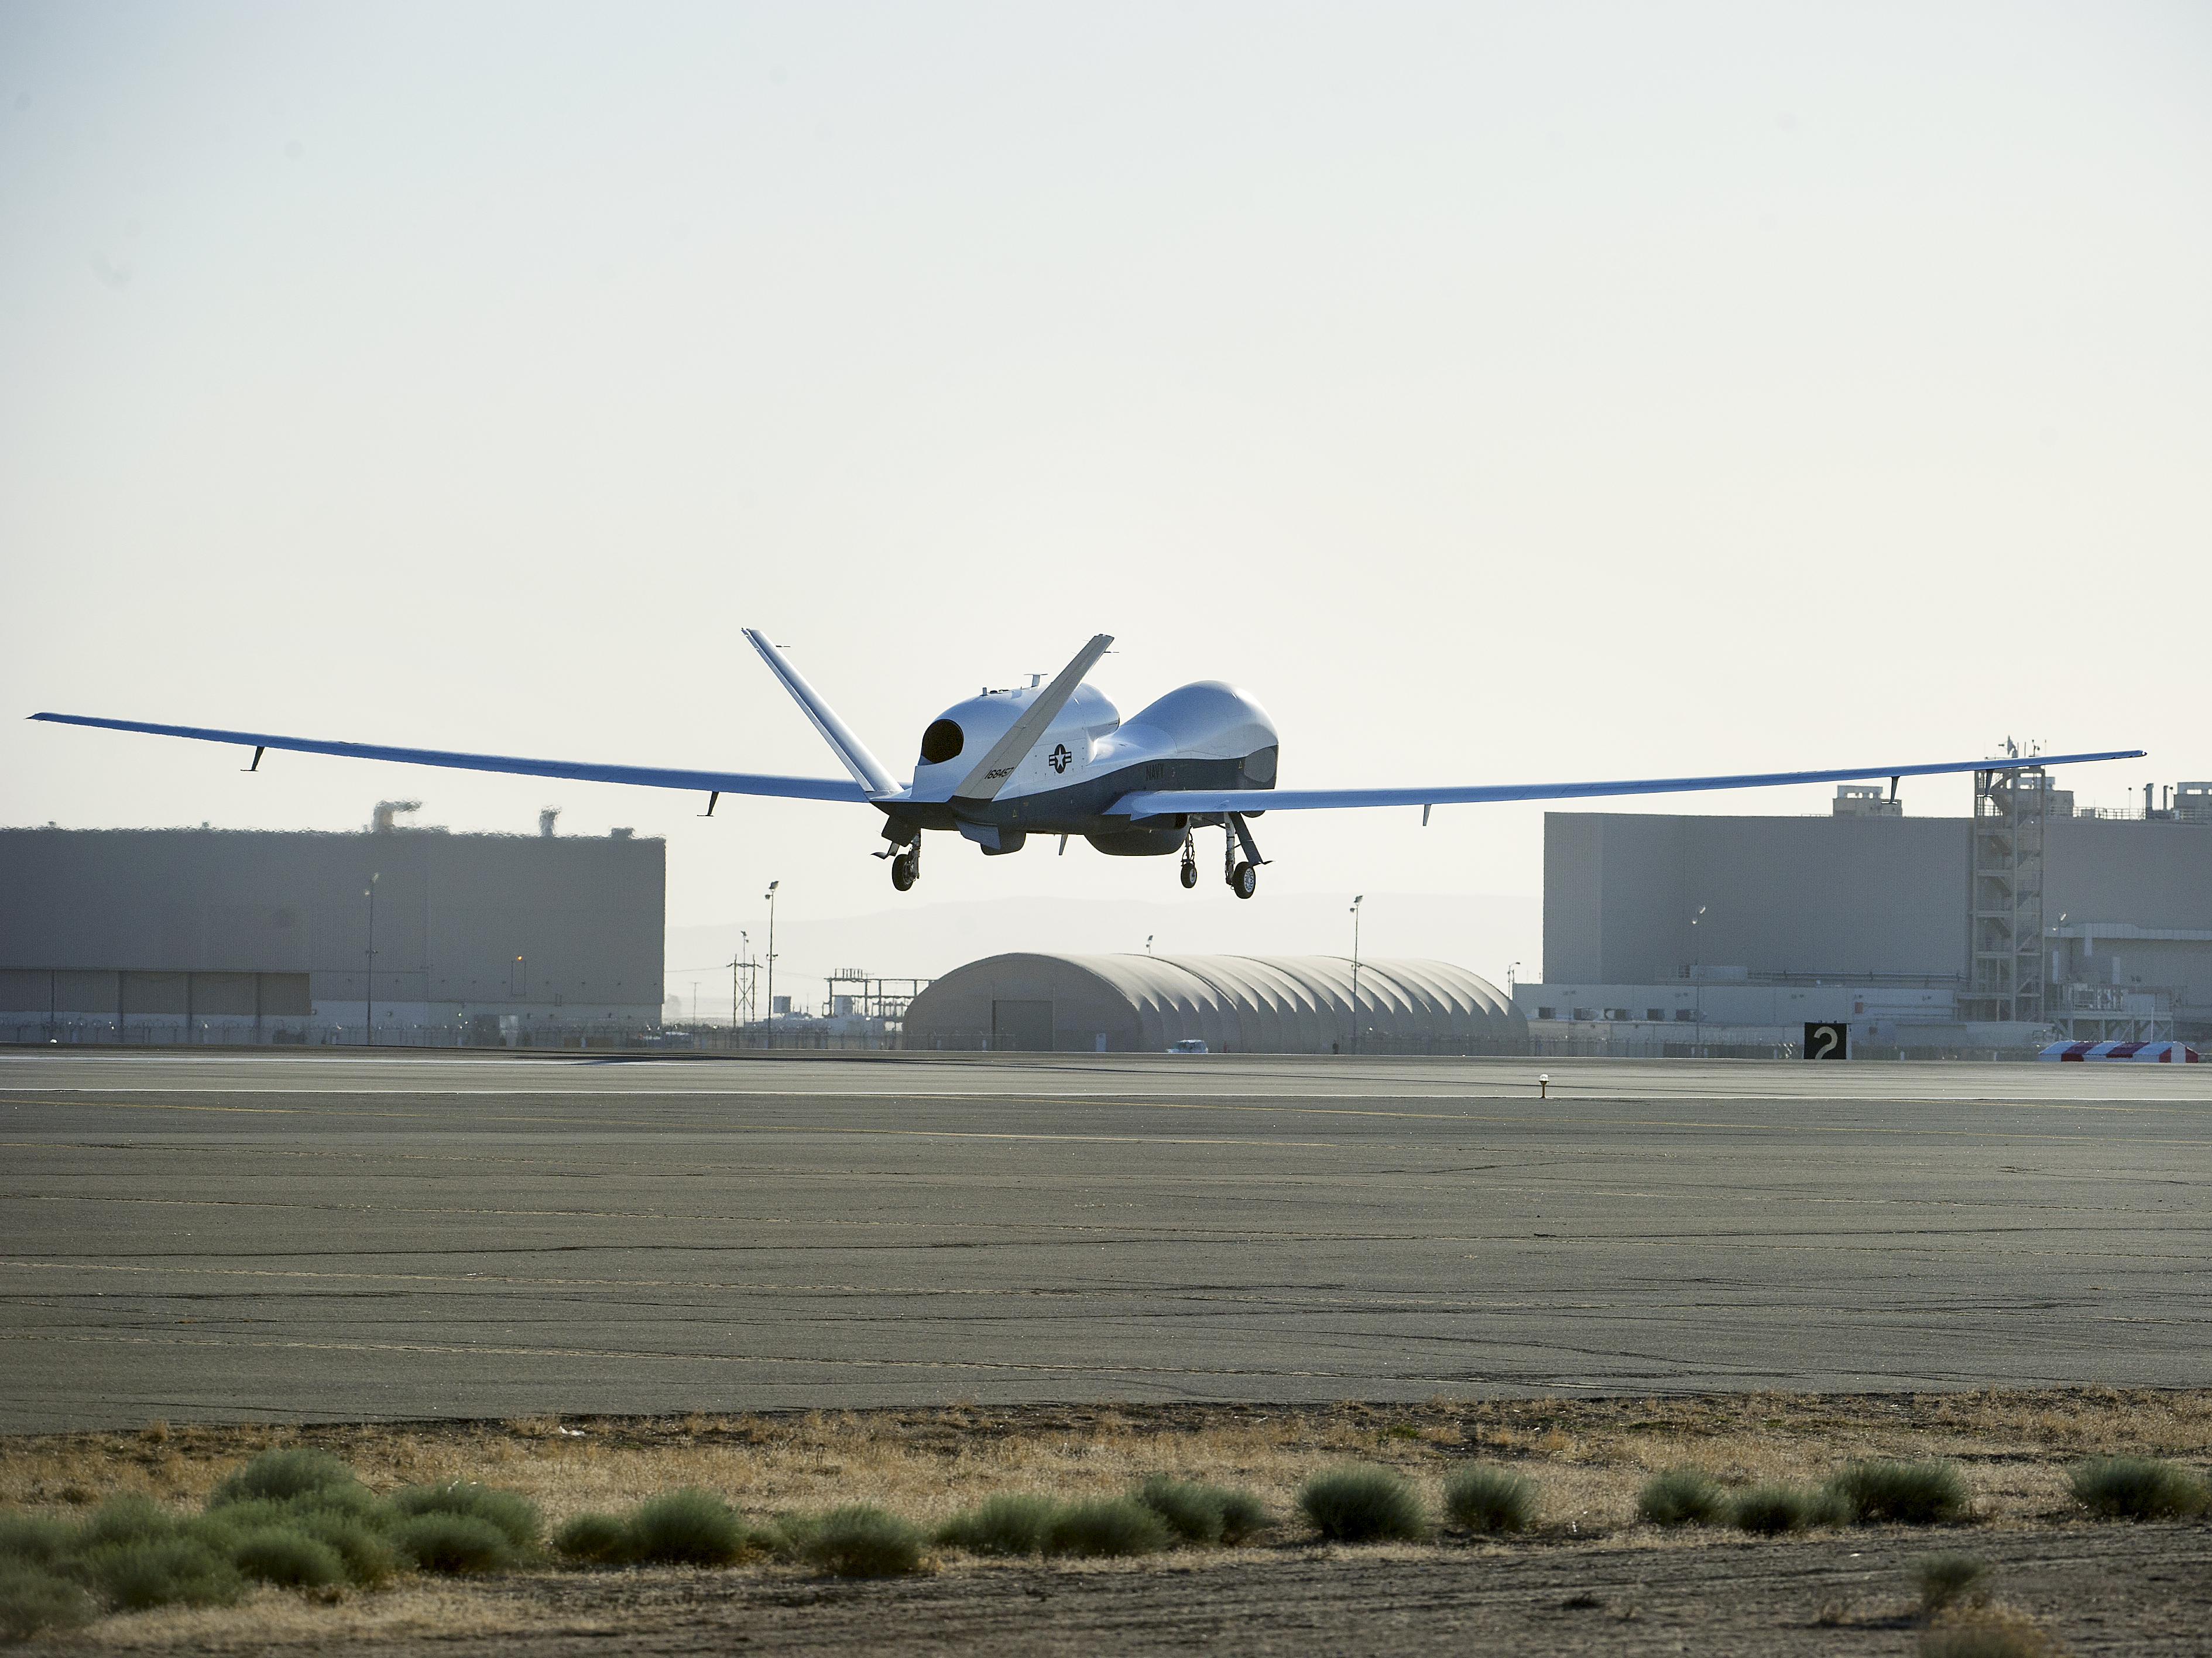 Triton unmanned aircraft system completes its first flight May 22, 2013 from the Northrop Grumman manufacturing facility in Palmdale, Calif. Northrop Grumman Photo